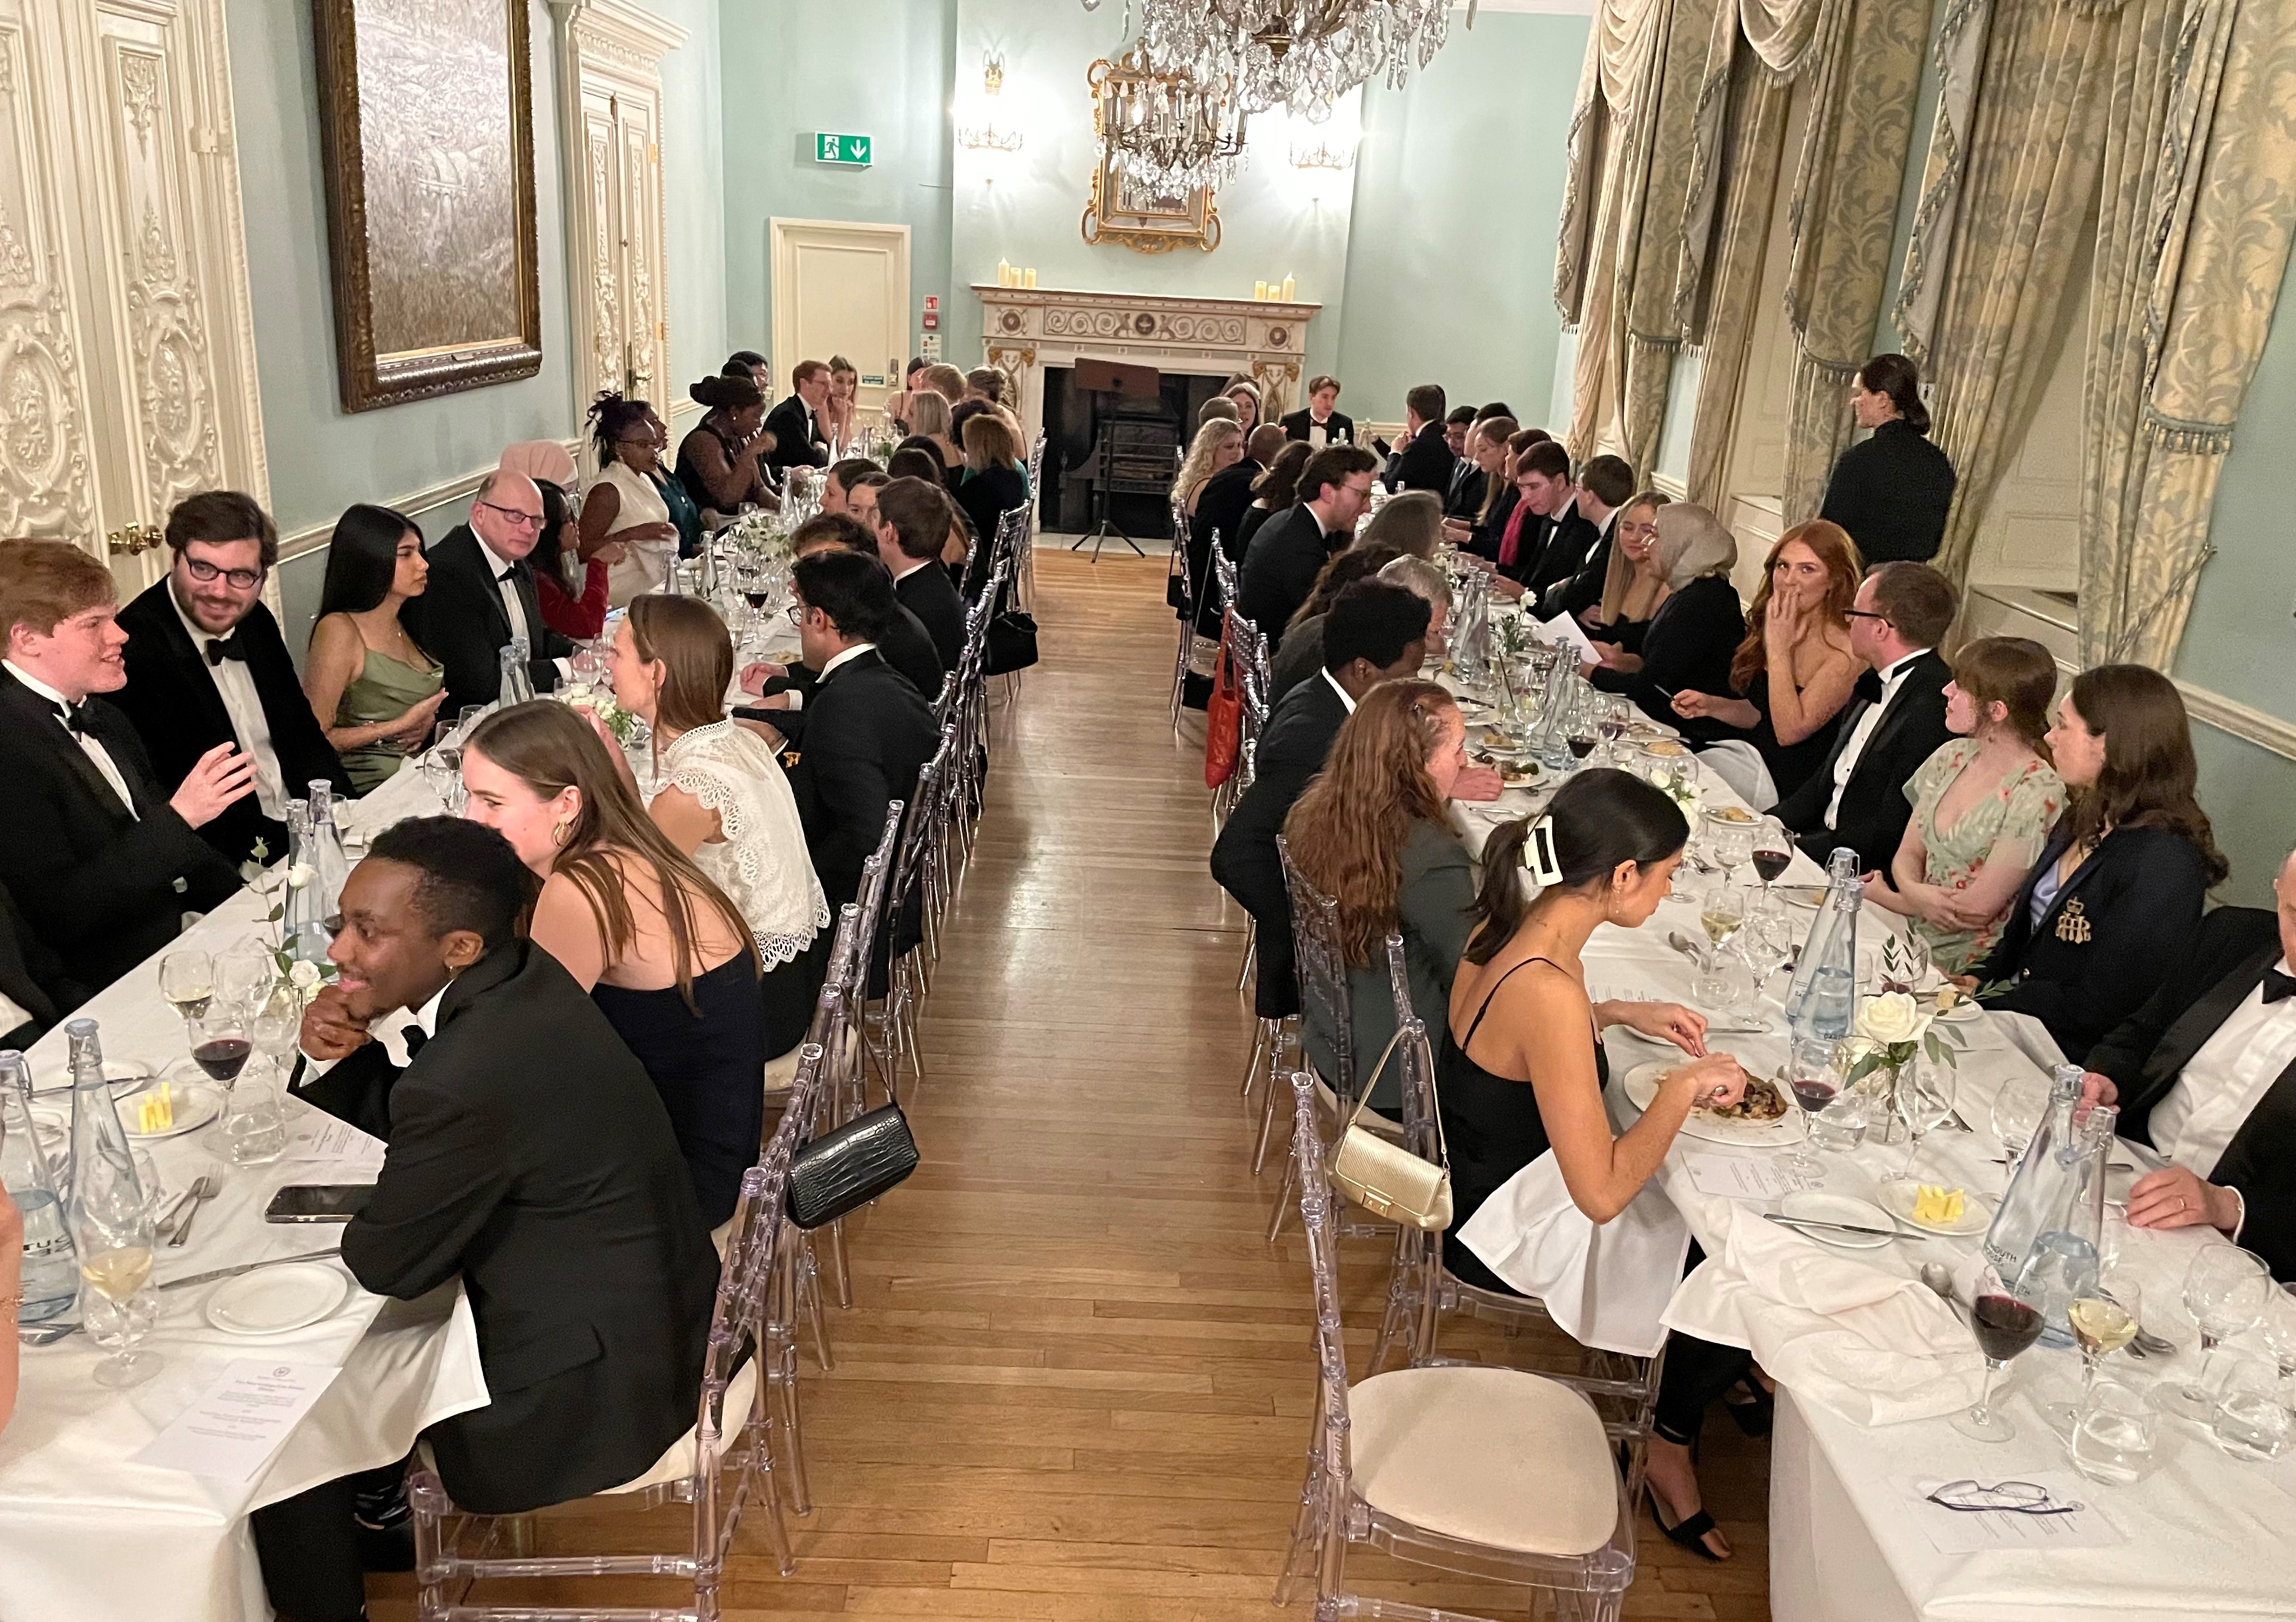 The dining room: two tables filled with guests enjoying a meal at Dartmouth House, Mayfair